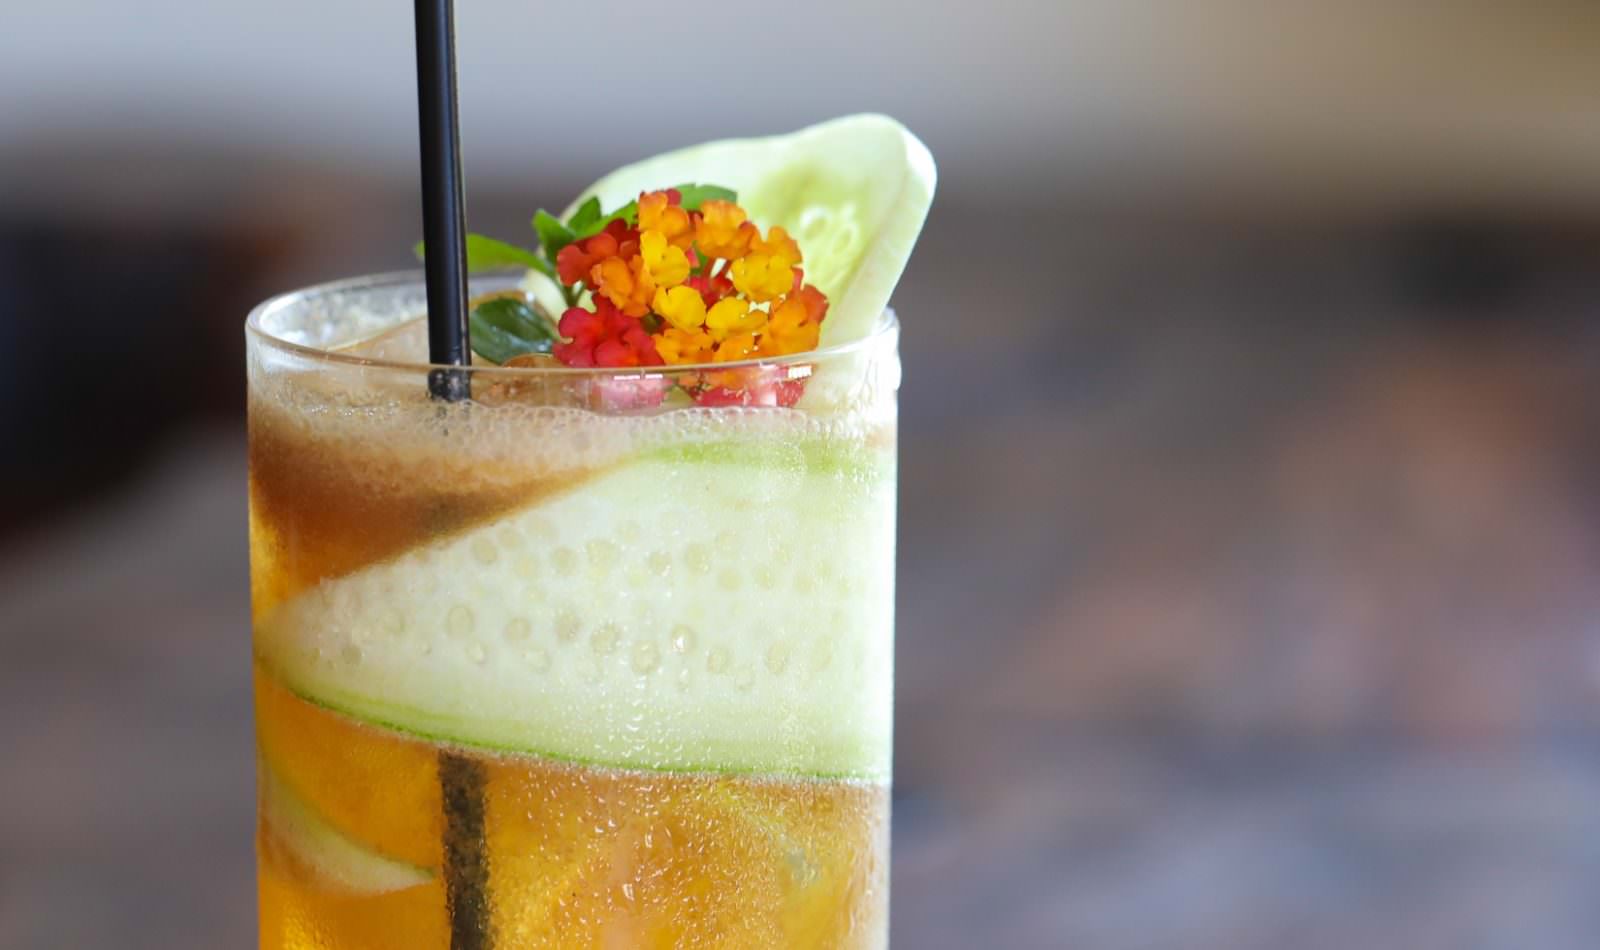 "Pimm's Cup" cocktail with edible flower and cucumber from Geyserville Gun Club